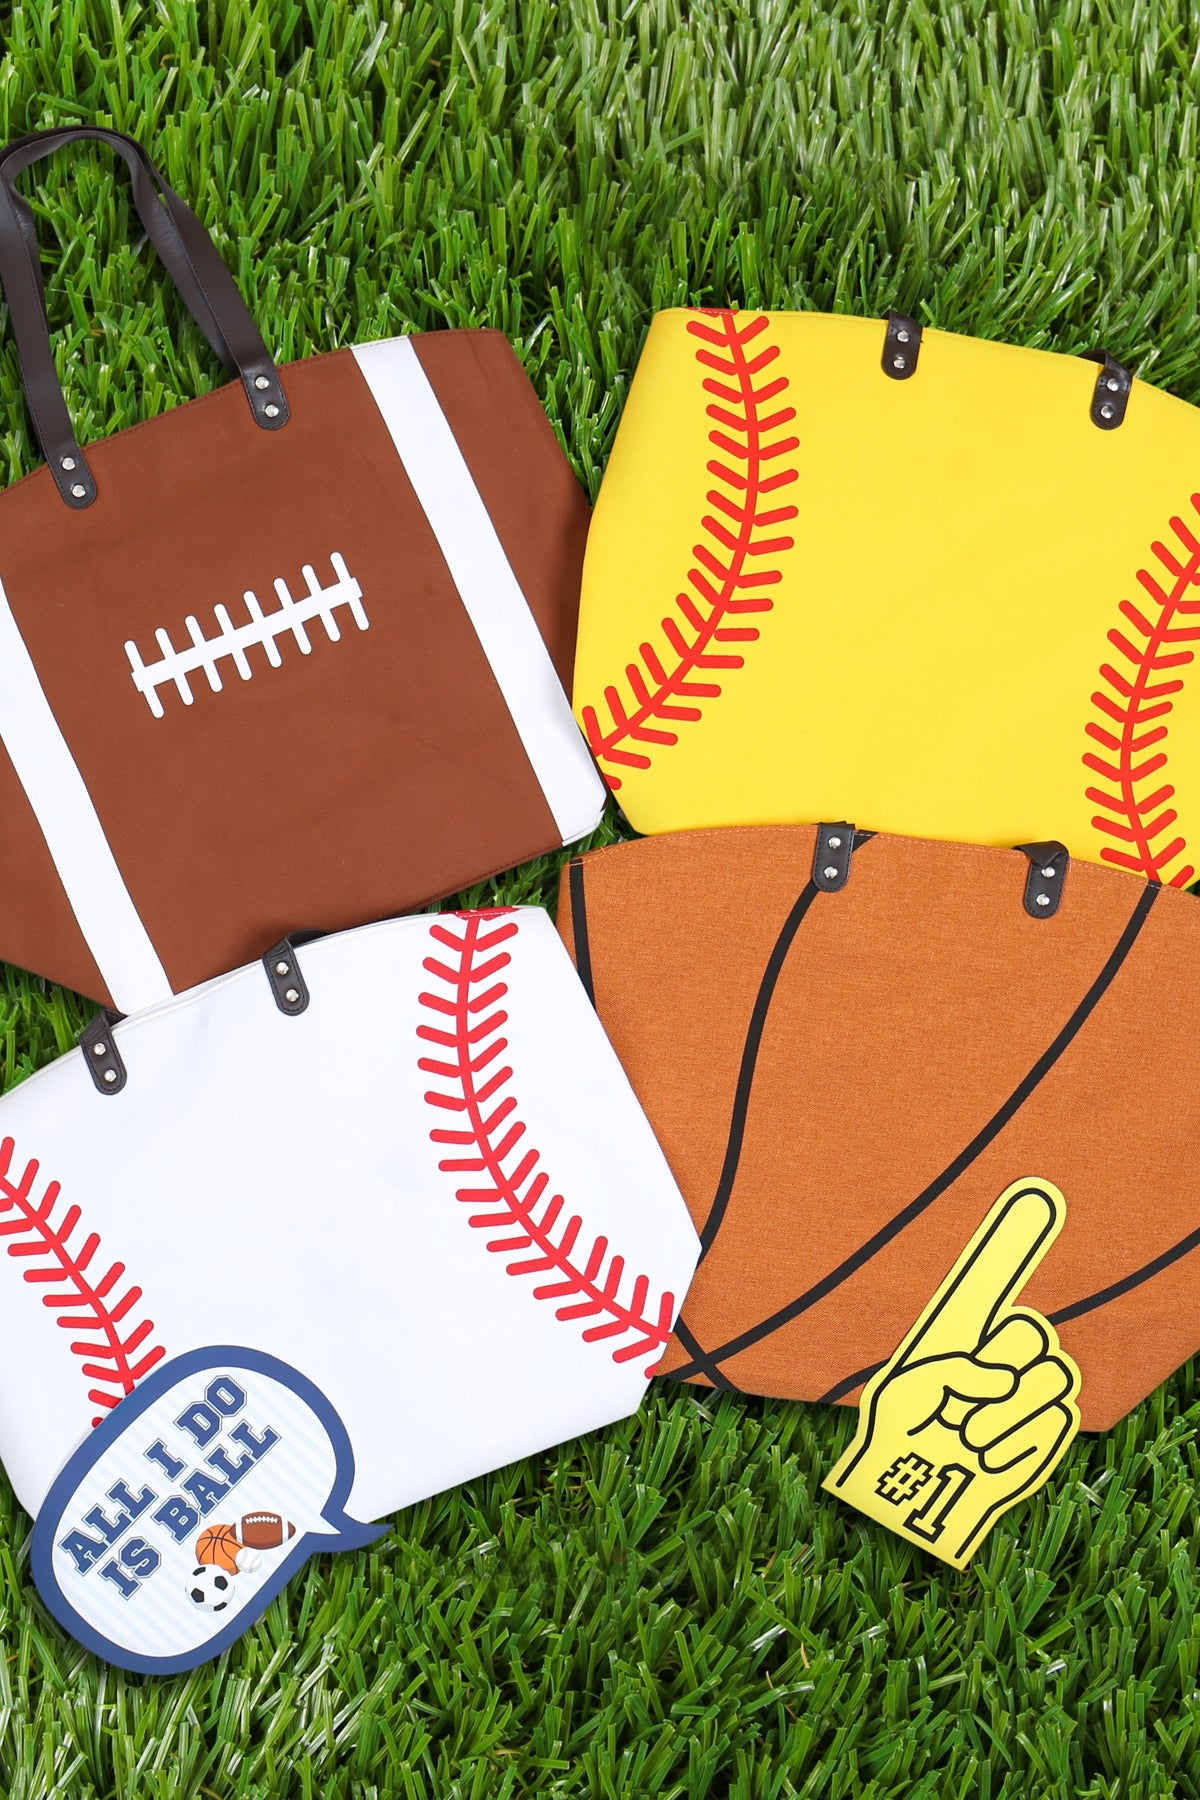 GAMEDAY SPORTS LEATHER TOTE BAG /6PCS